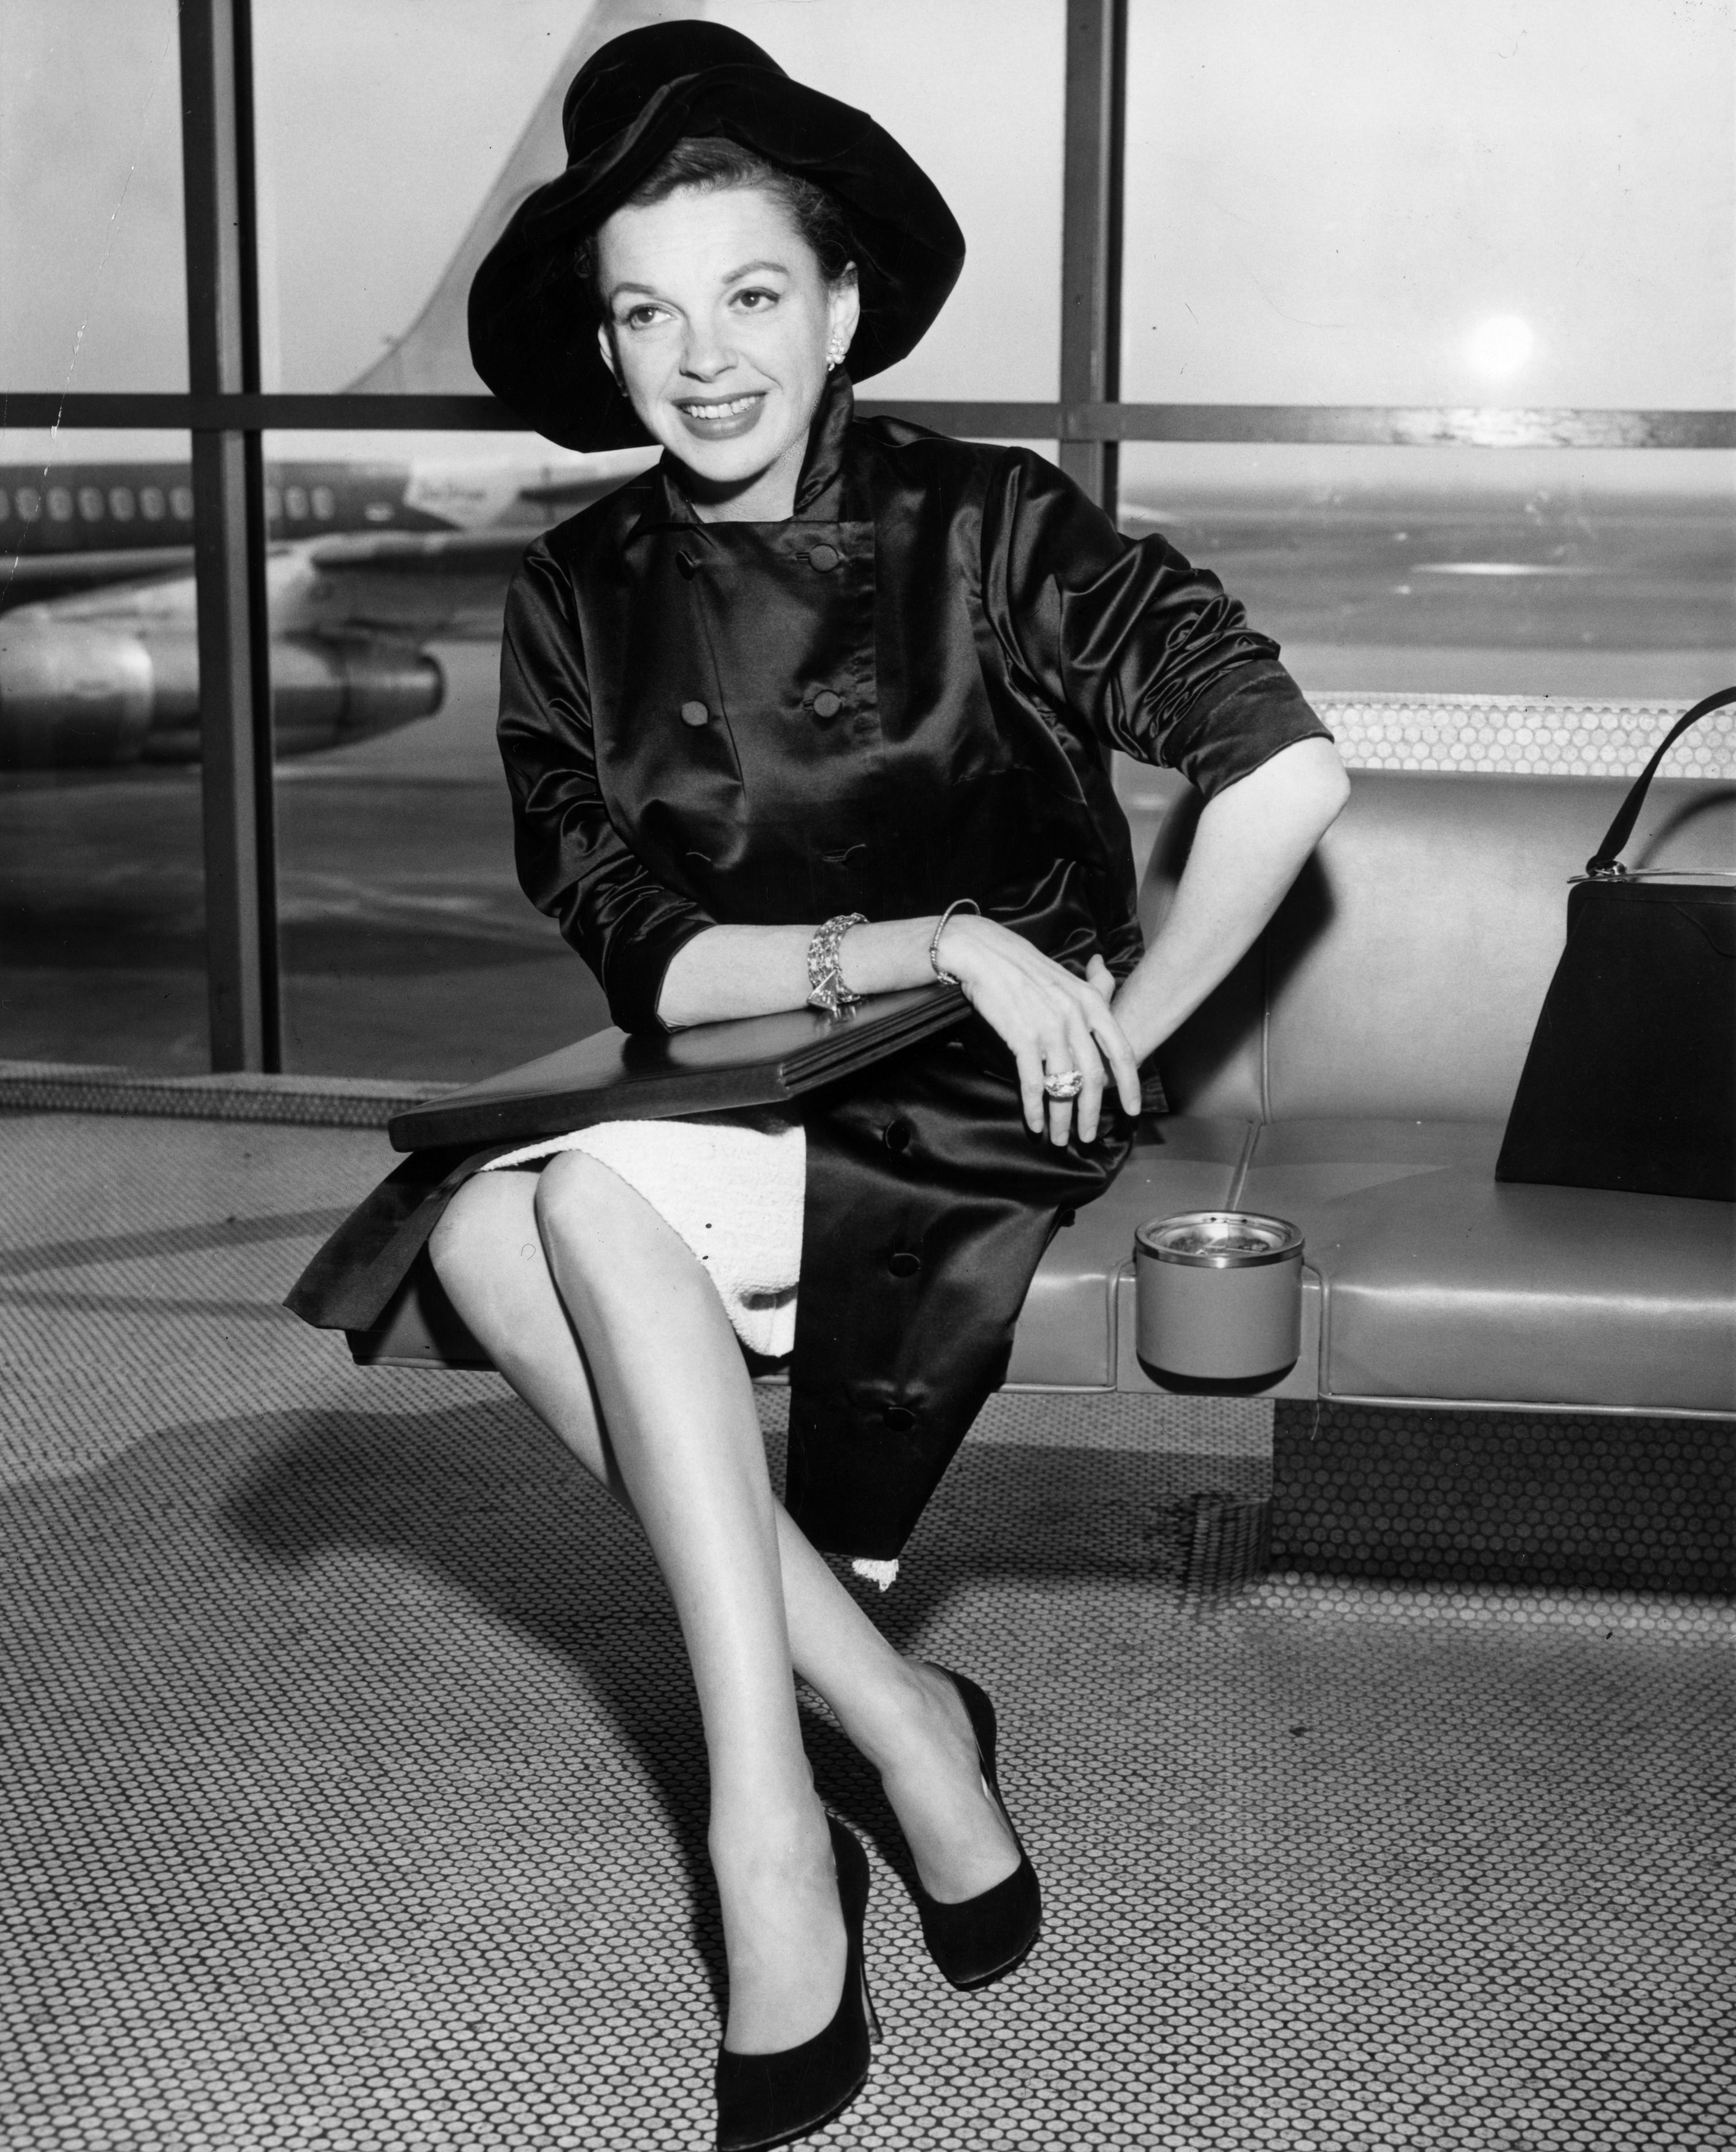 Judy Garland (1922 - 1969) at an airport. | Source: Getty Images